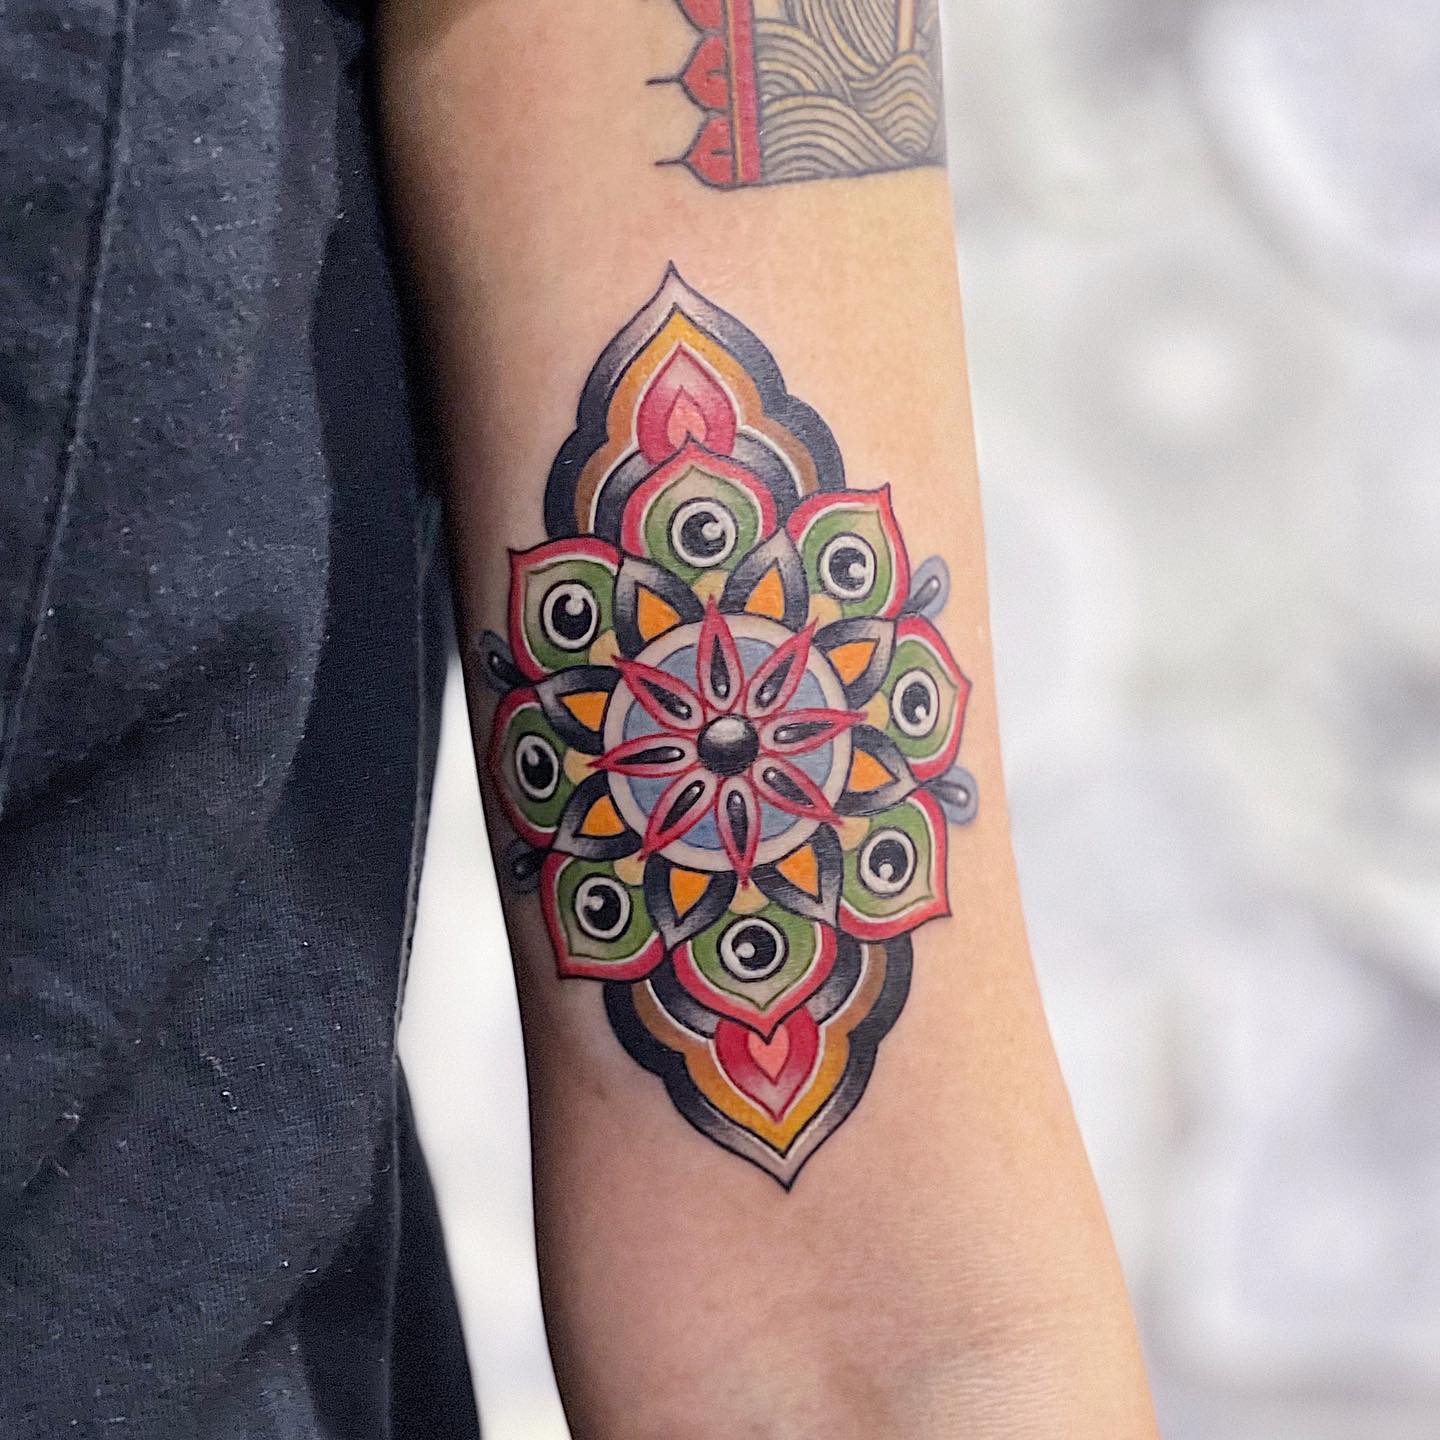 Red, green, and yellow colors stand for bright and optimistic nature. If you’re a fan of louder tattoos and you want yours to stand for creativity, positivity, and your quirky character, try out this tattoo.